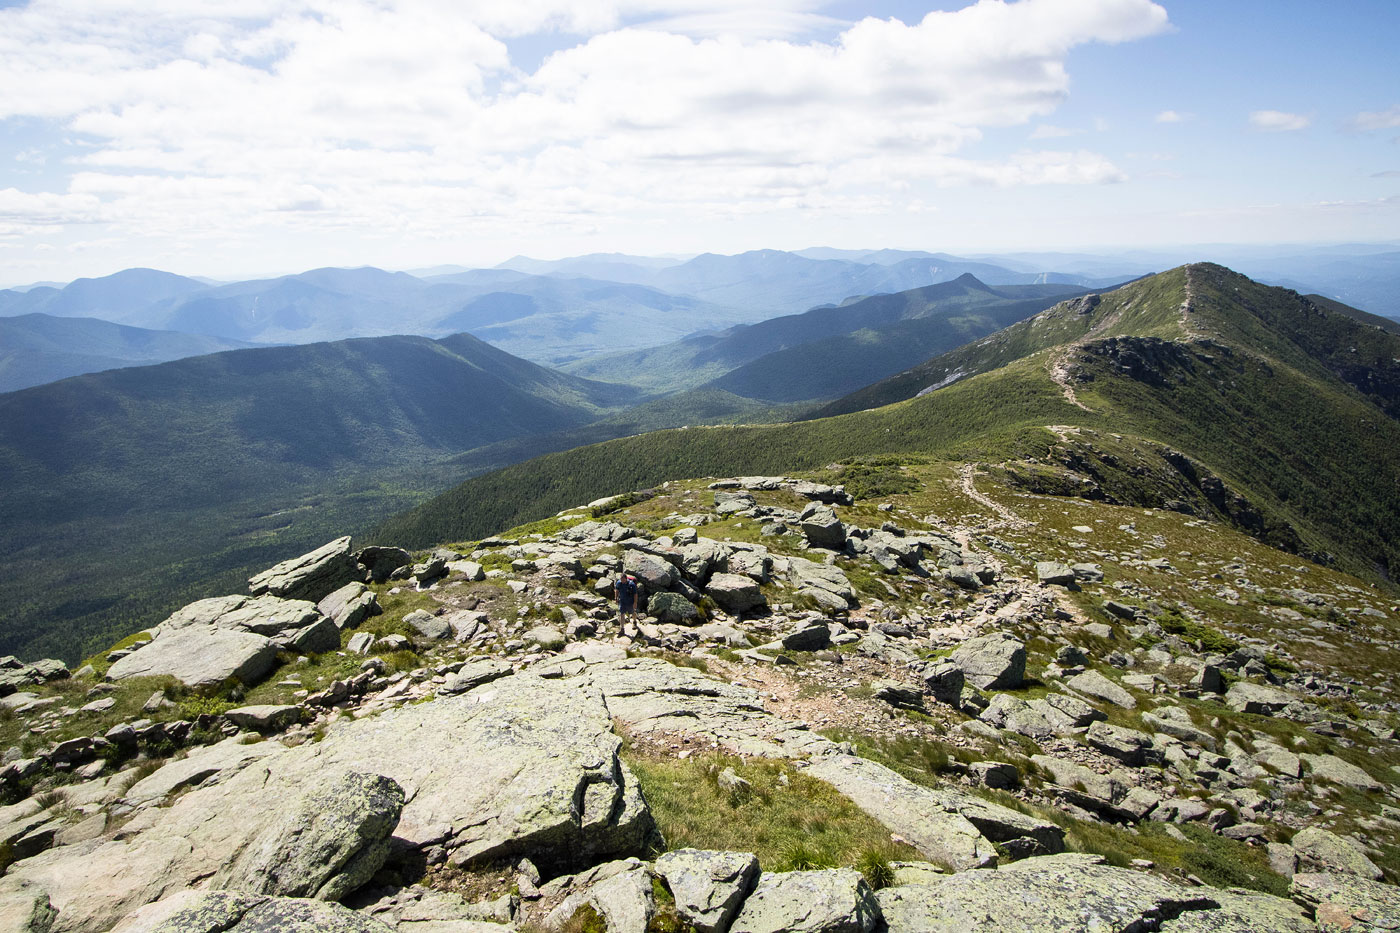 Hike Pemigewasset Loop in White Mountain National Forest, New Hampshire - Stav is Lost